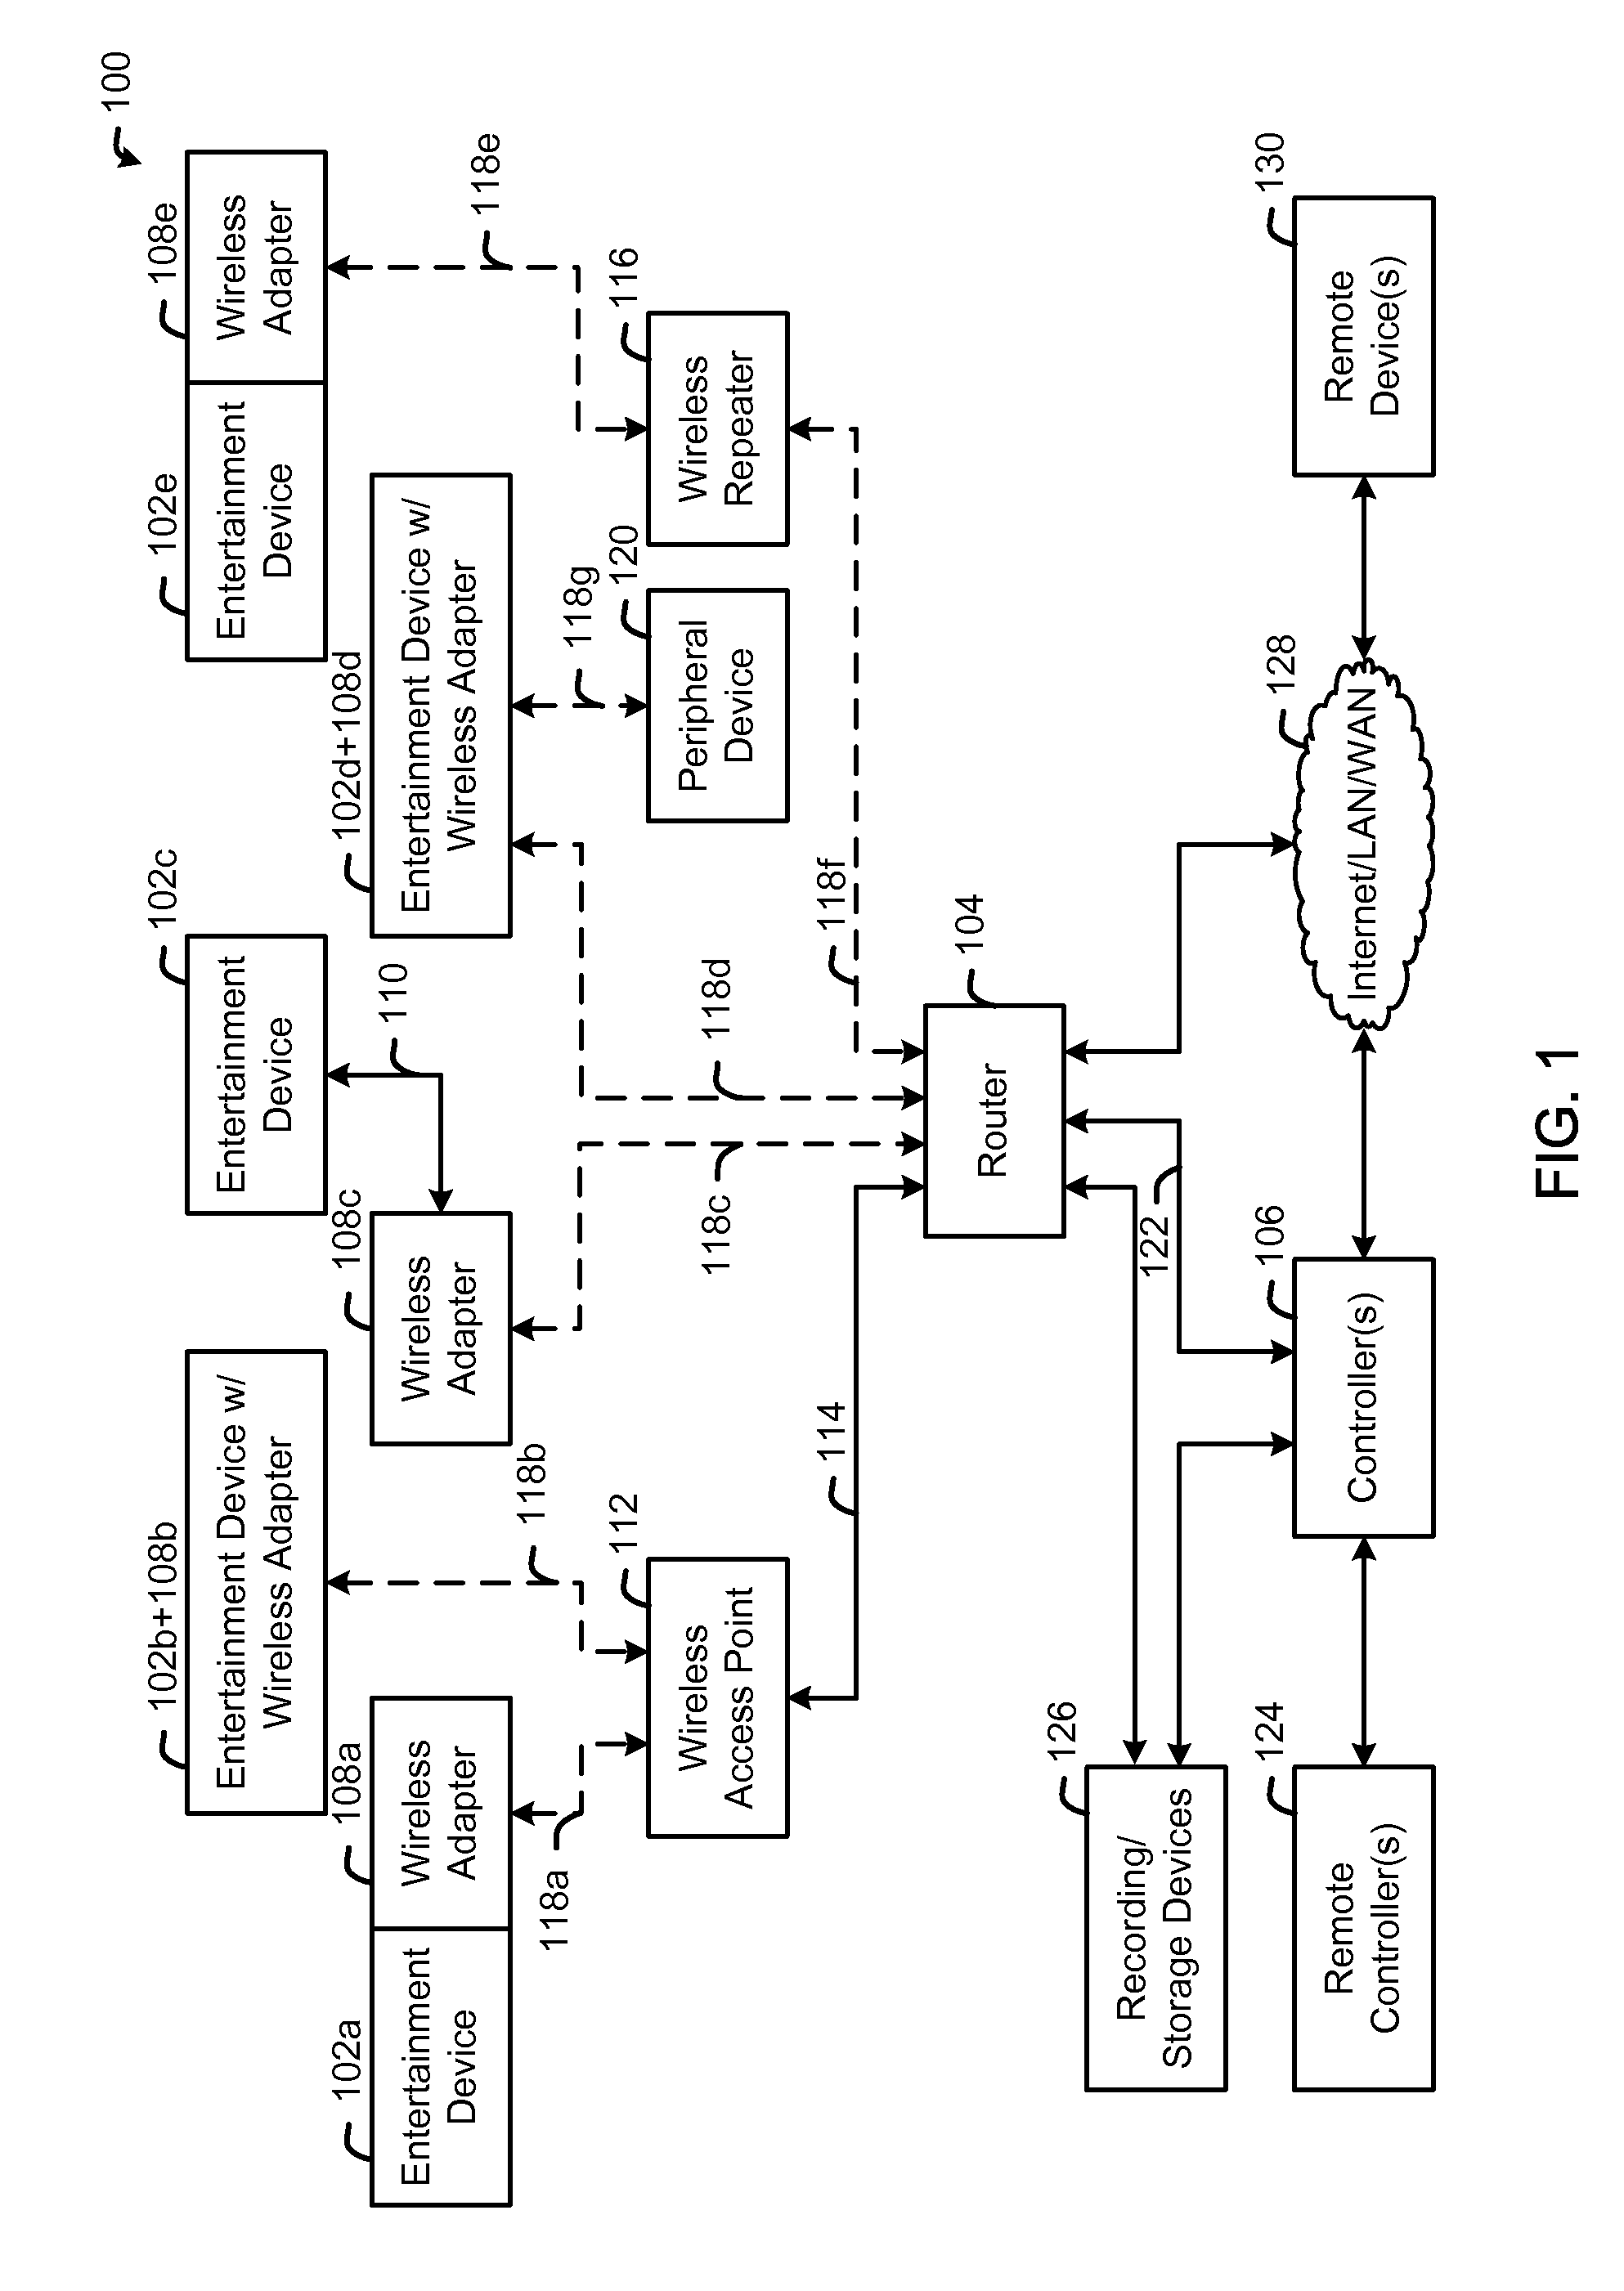 System, apparatus and method for configuring a wireless sound reinforcement system